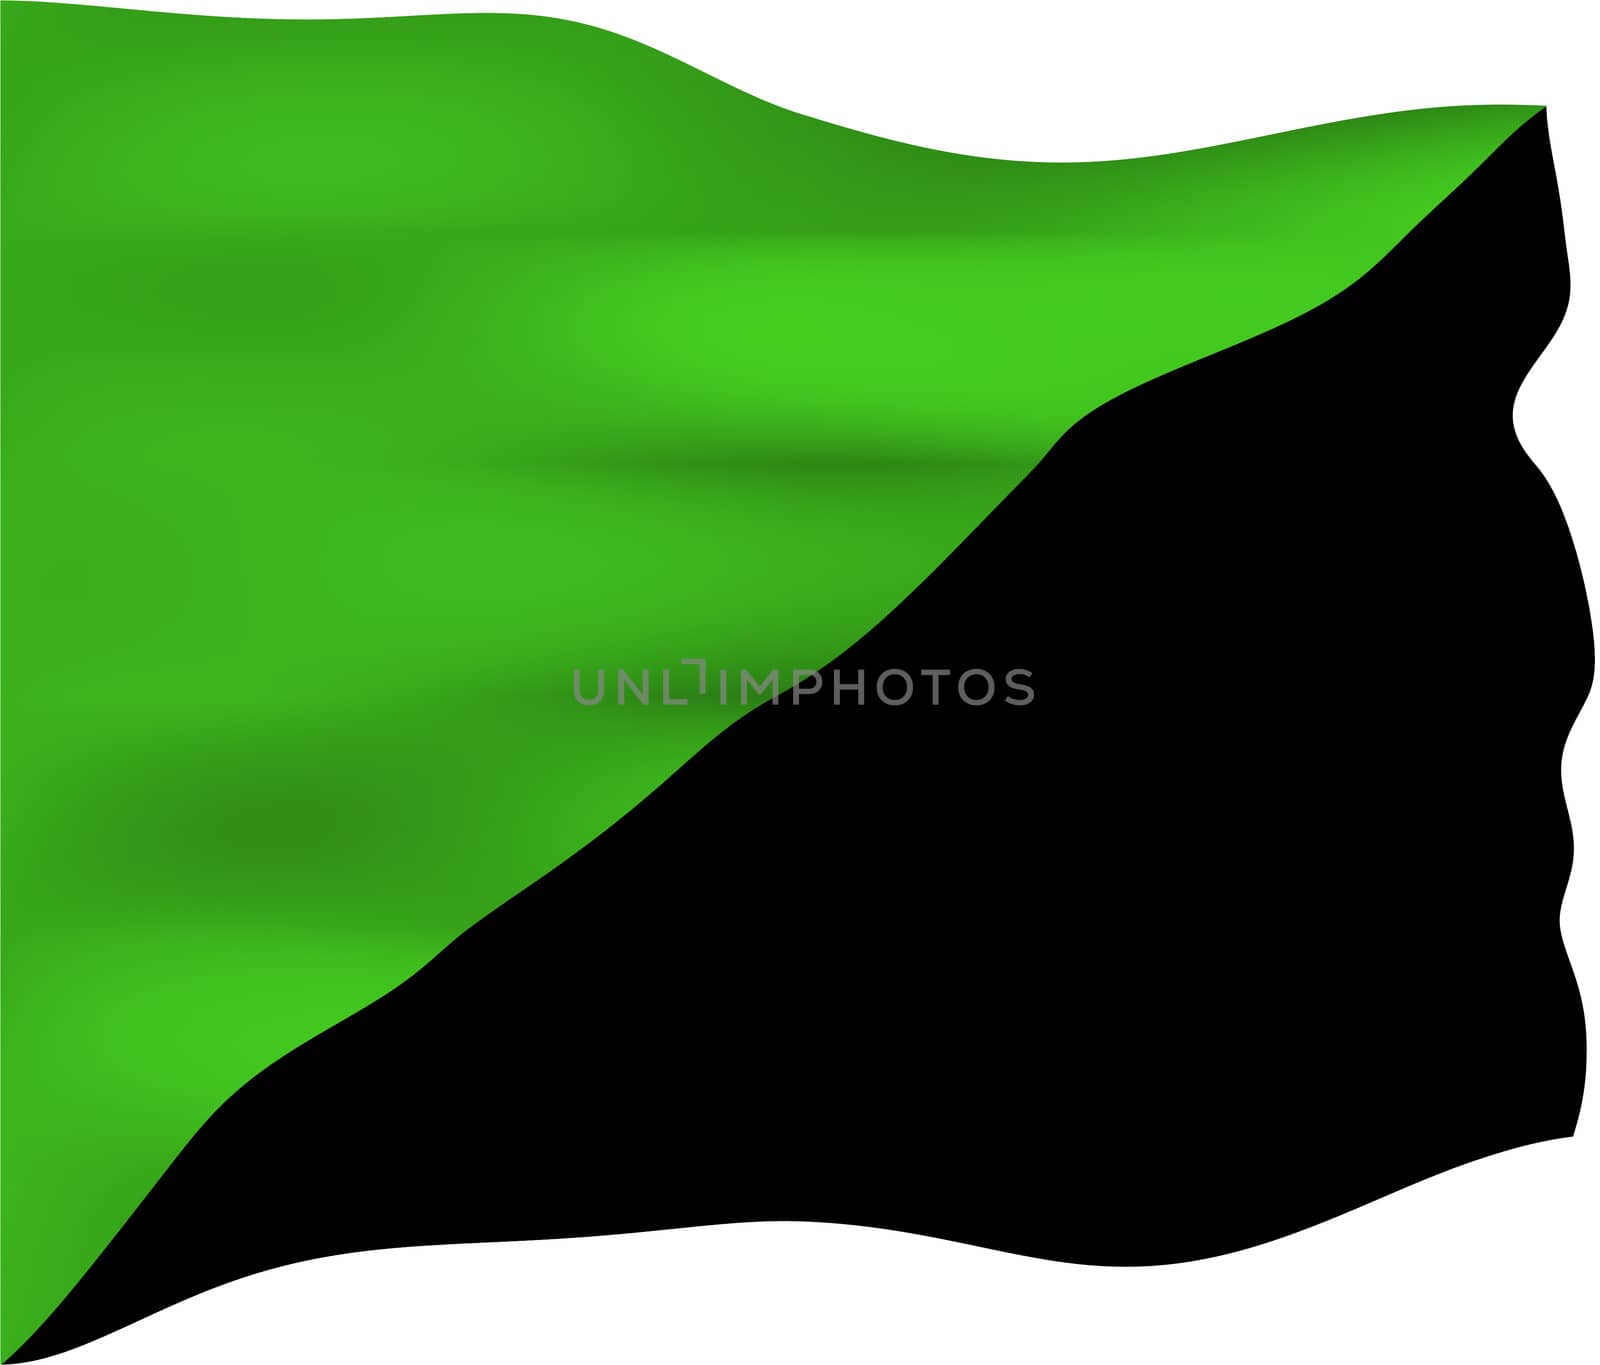 Green anarchism flag used by social ecologists, green anarchists, anti-civilization anarchists and anarcho-primitivists. It is generally taken to symbolize a vision of anarchism that focuses on the self-determination of all forms of life and not just humans, hence the green.
